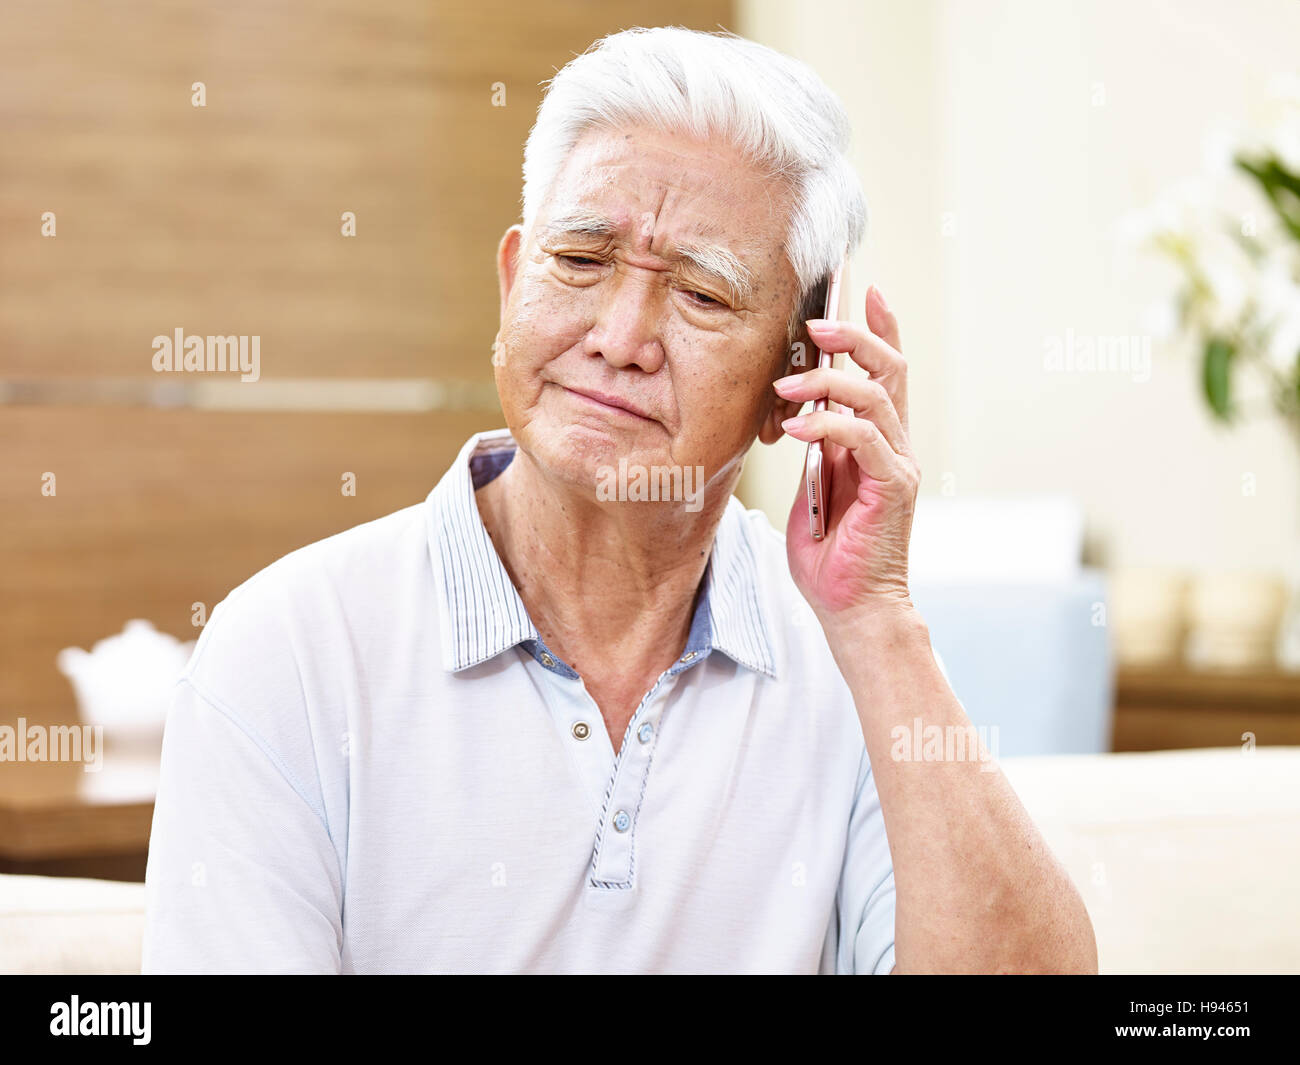 senior asian man talking using mobile phone, appears to be unhappy, sad or angry Stock Photo